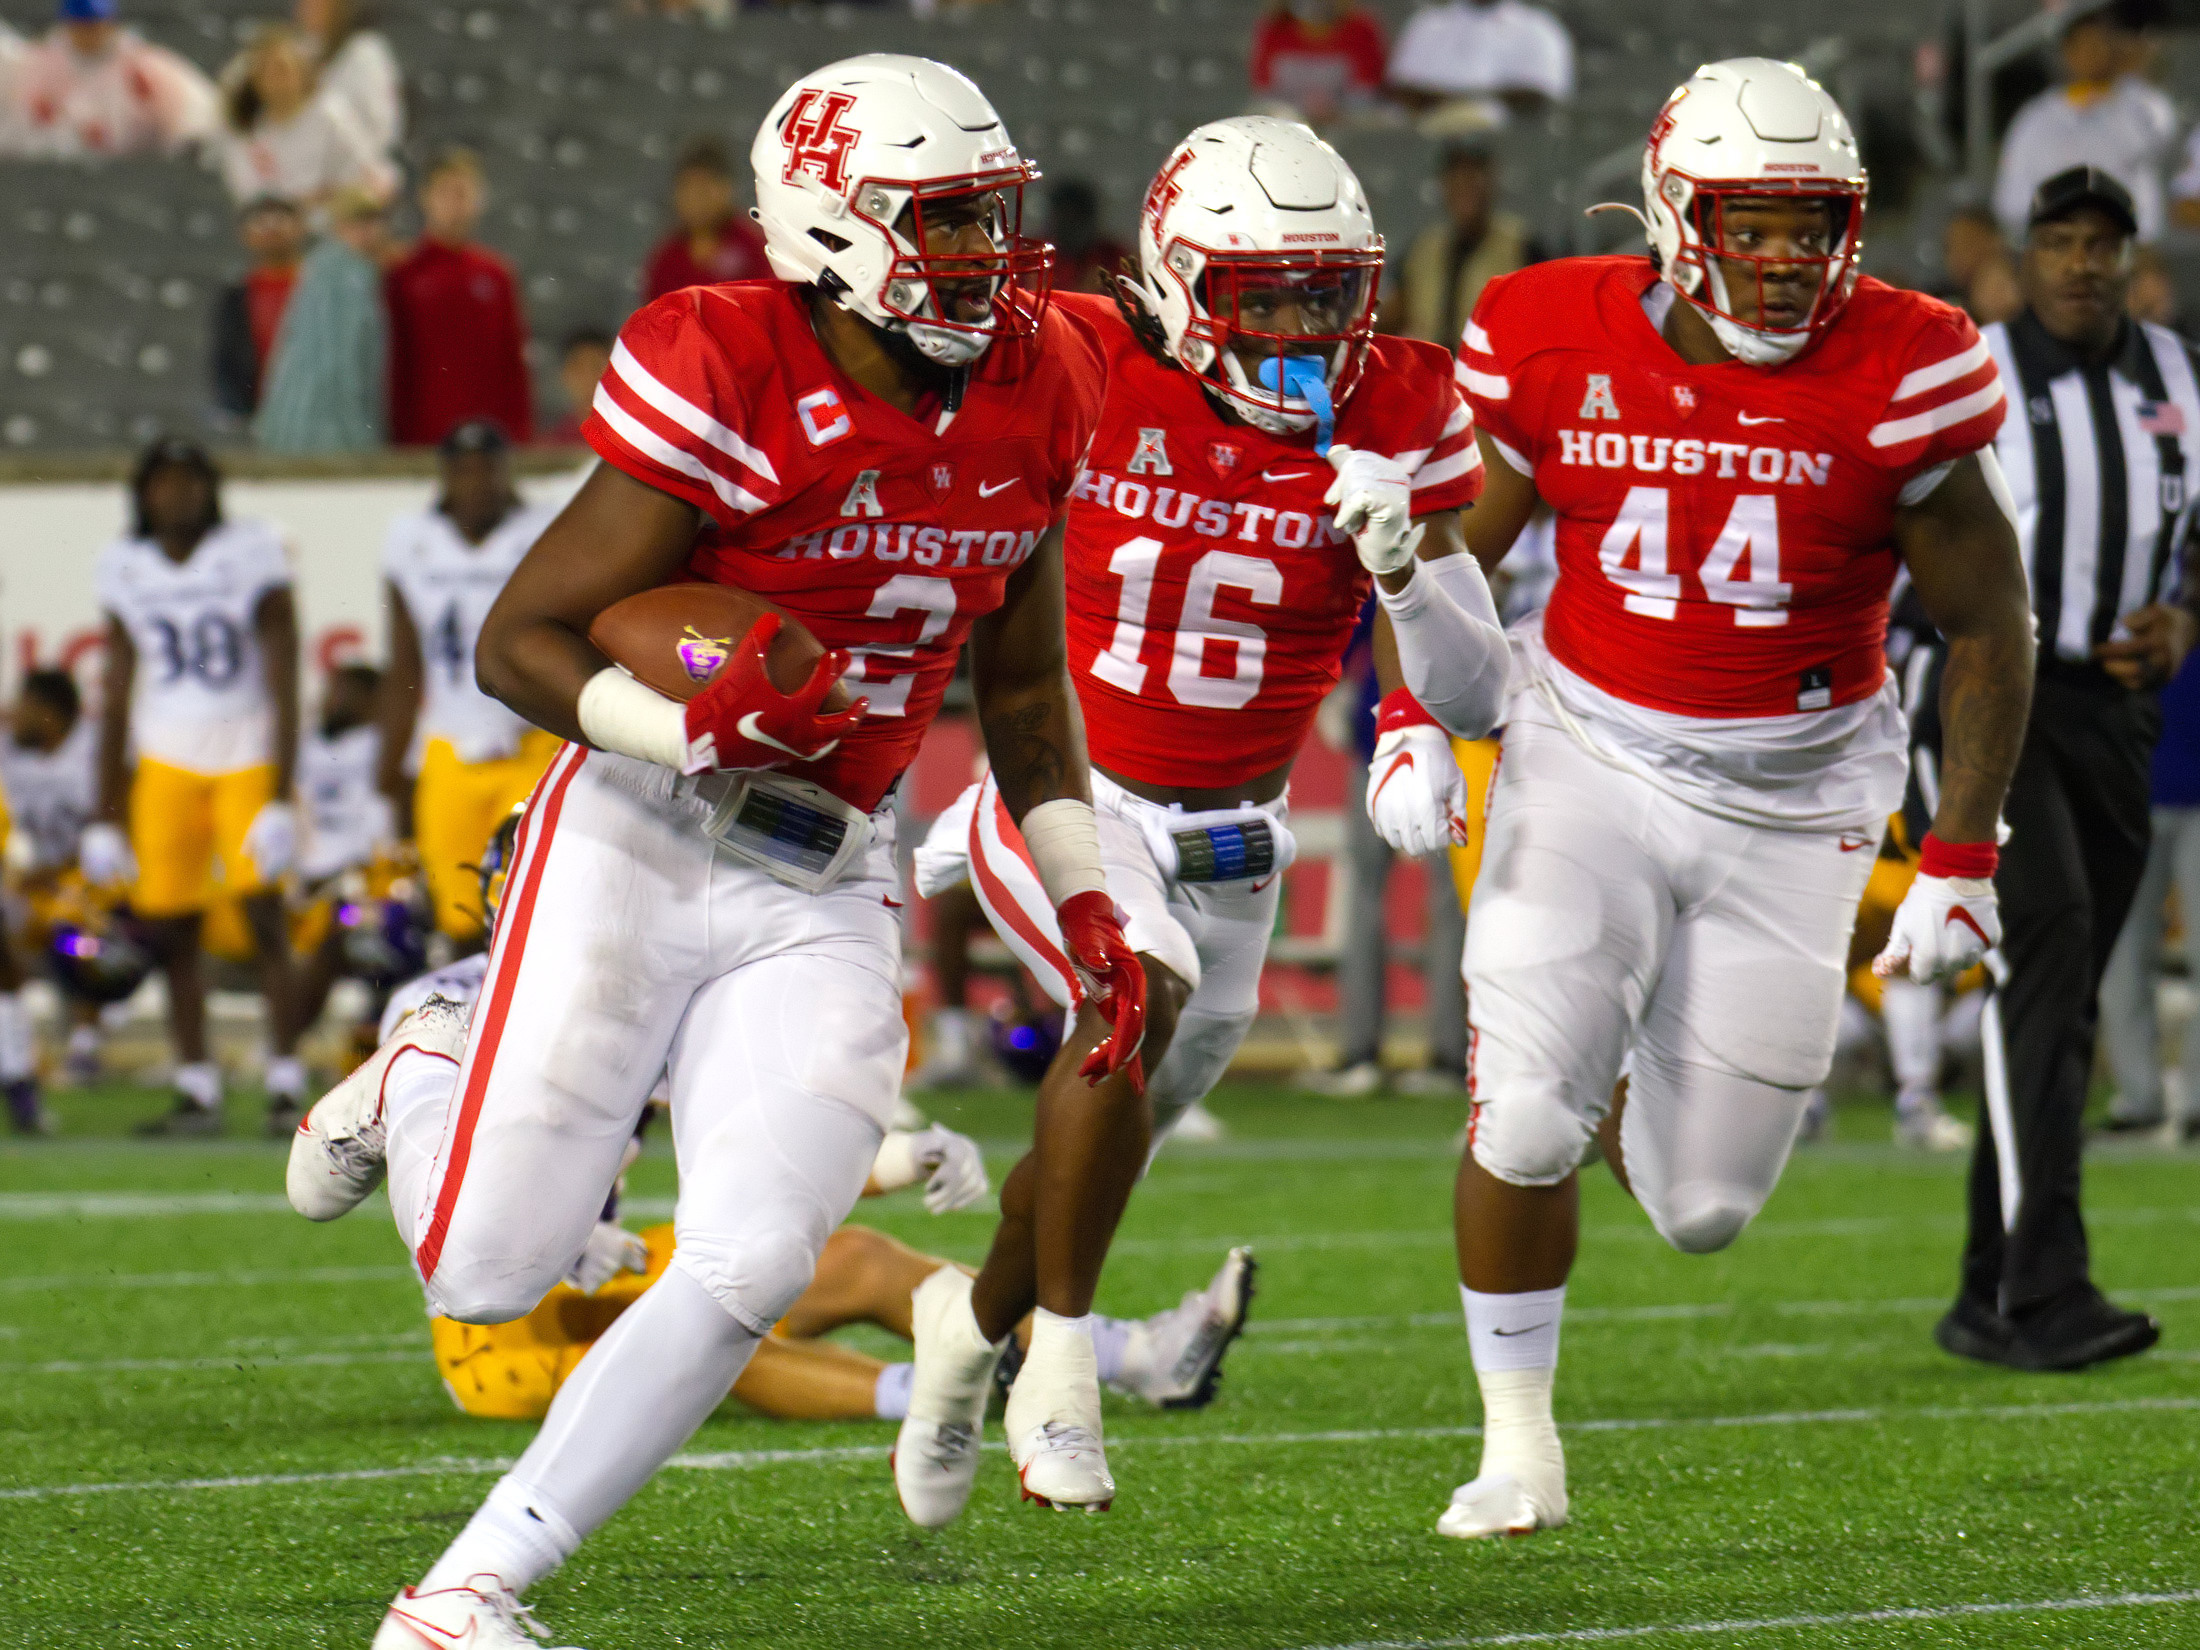 Senior linebacker Deontay Anderson scooped up one of three forced fumbles in UH football's win over ECU. | Steven Paultanis/The Cougar